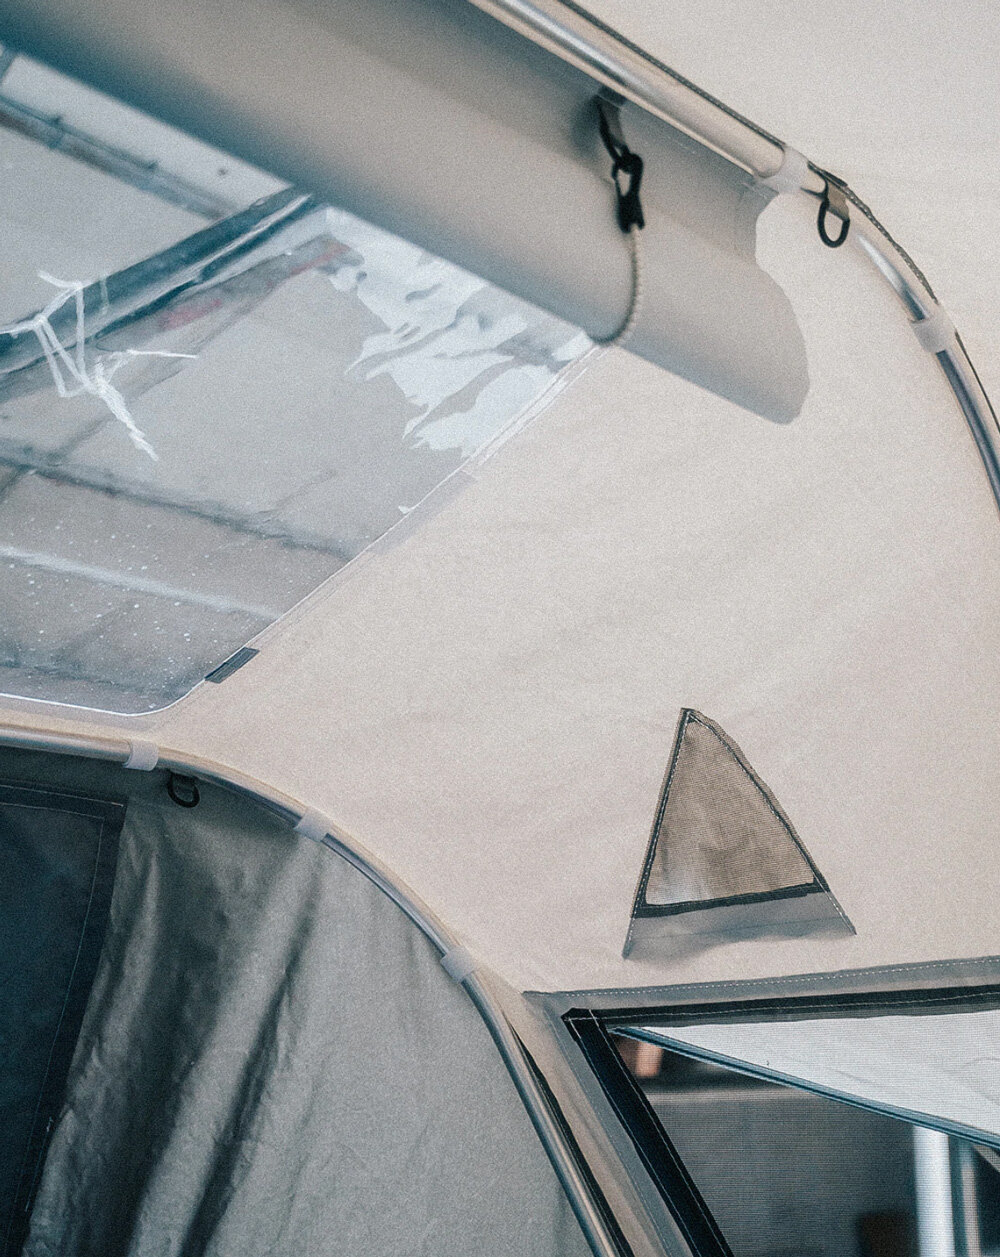 roof space one is a panoramic car tent that can be easily set up